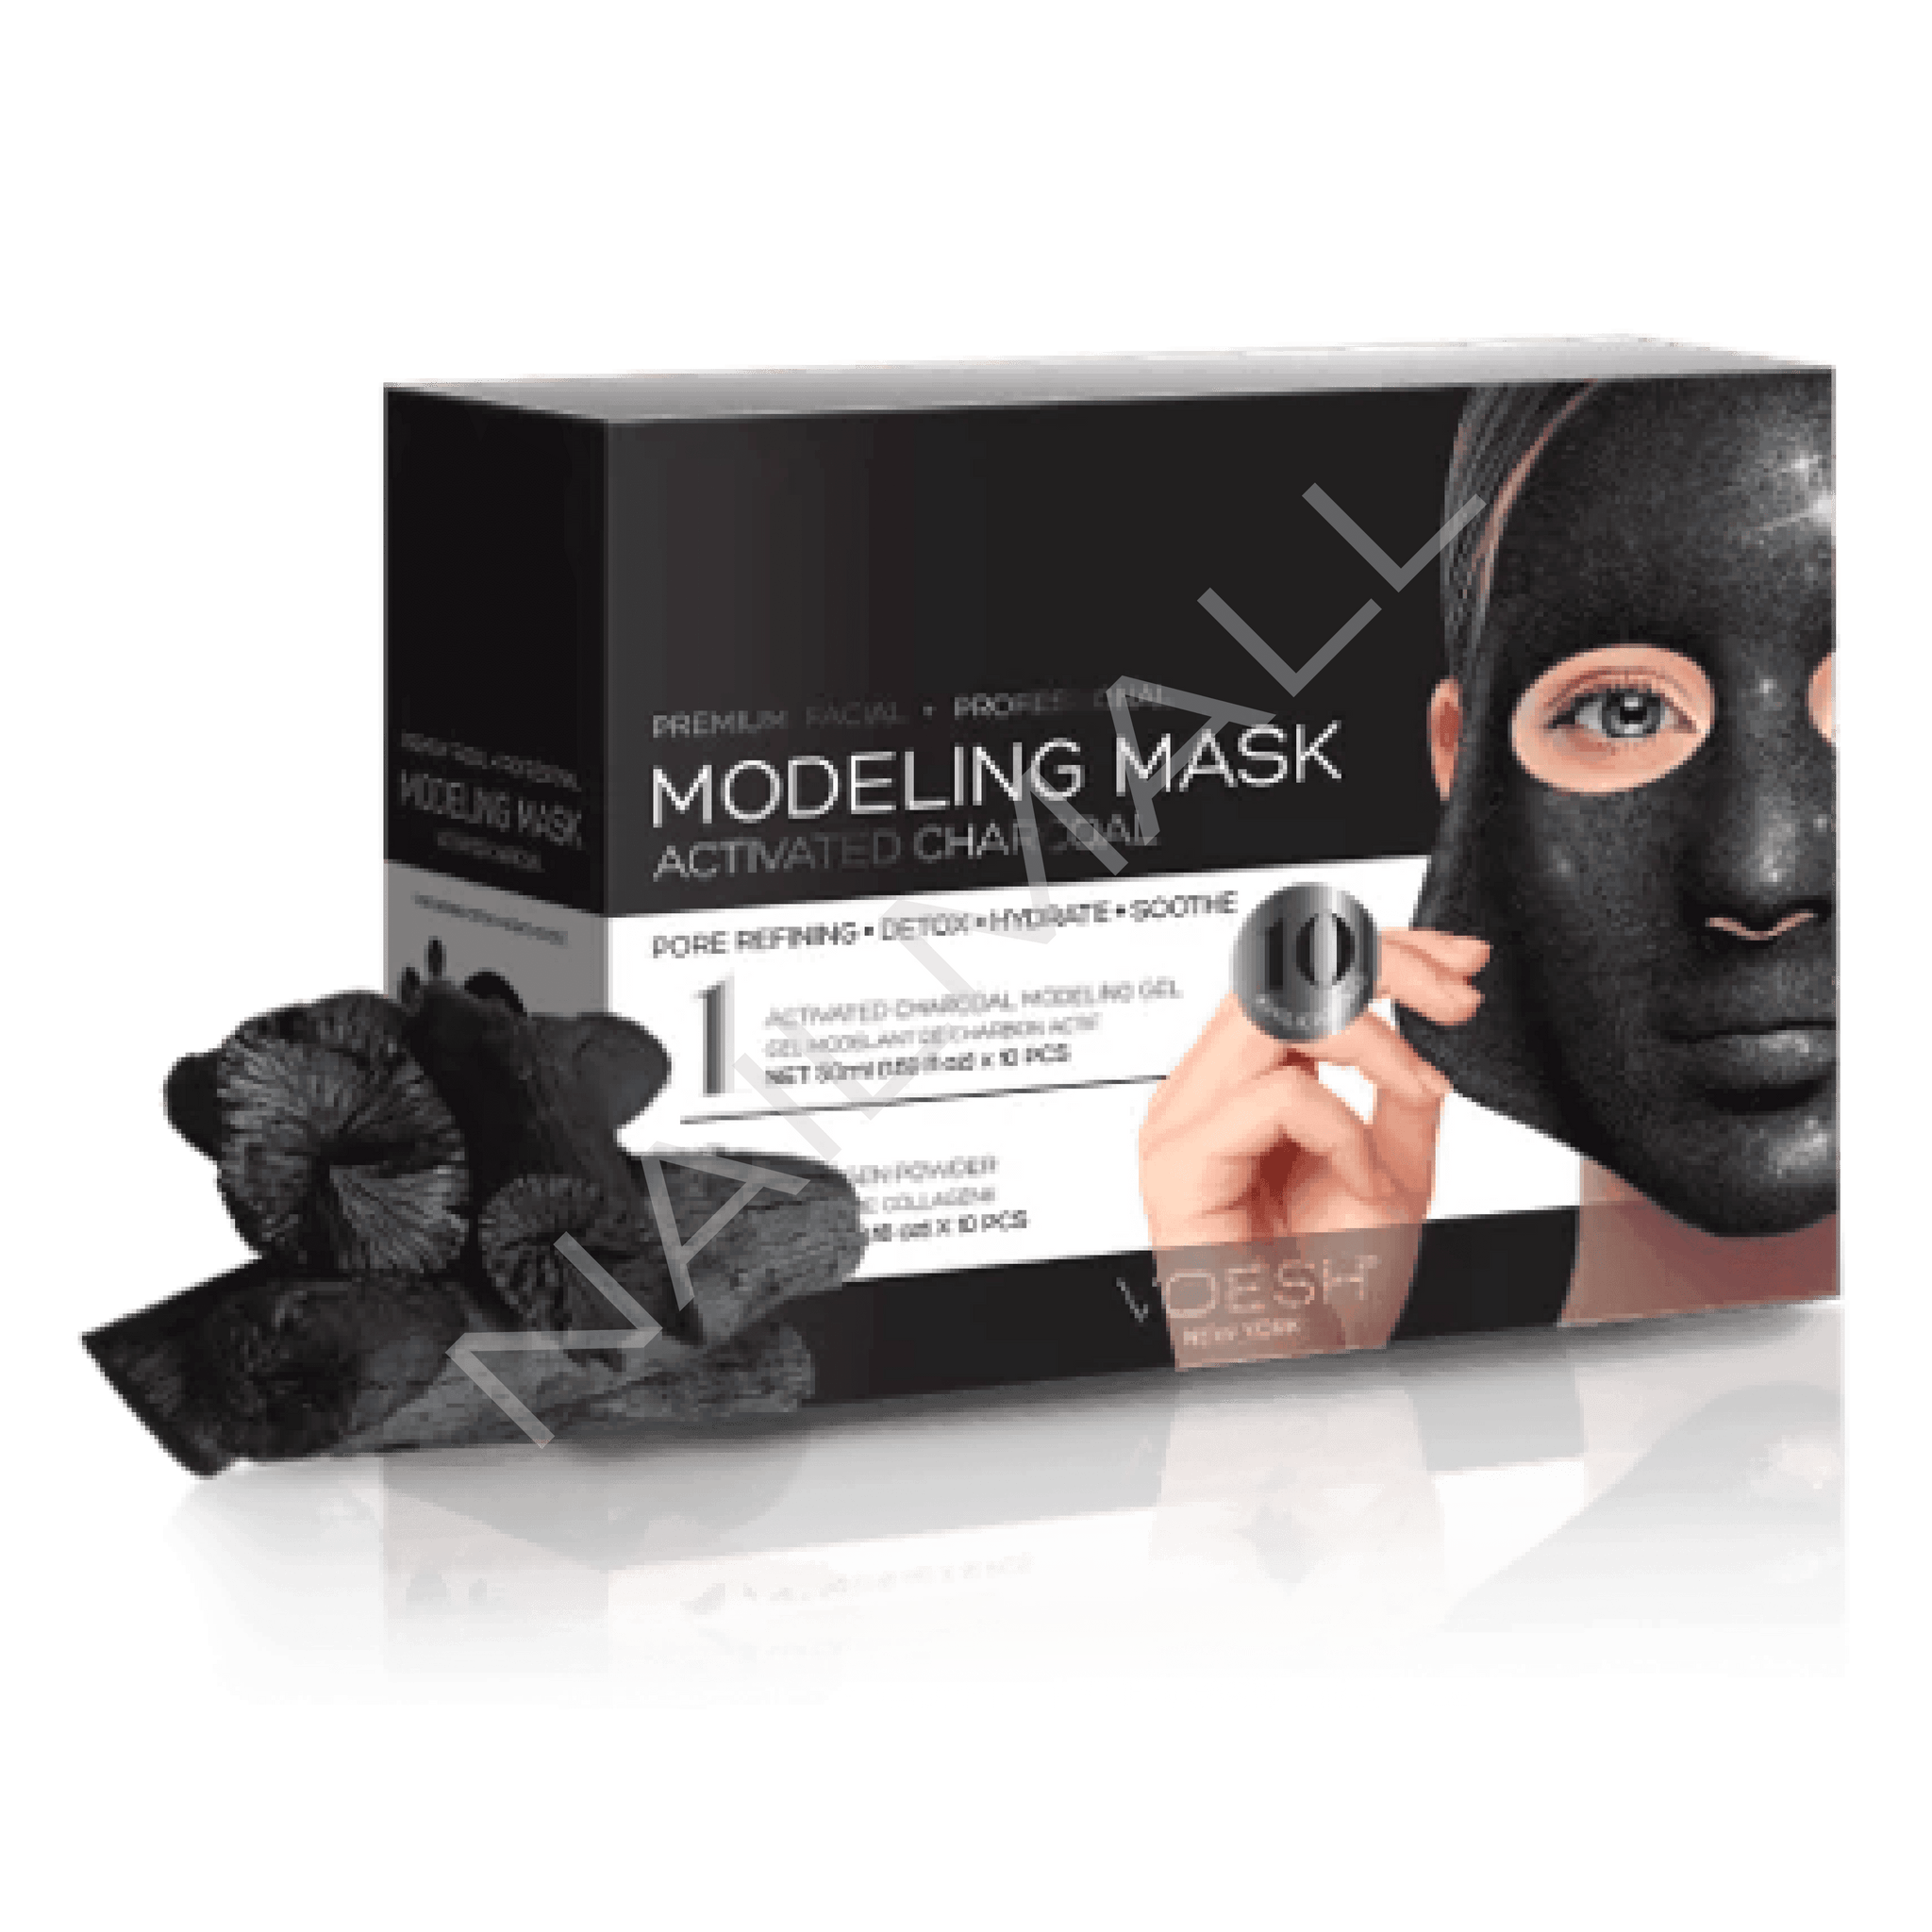 VOESH Modeling Mask - Activated Charcoal 10pc